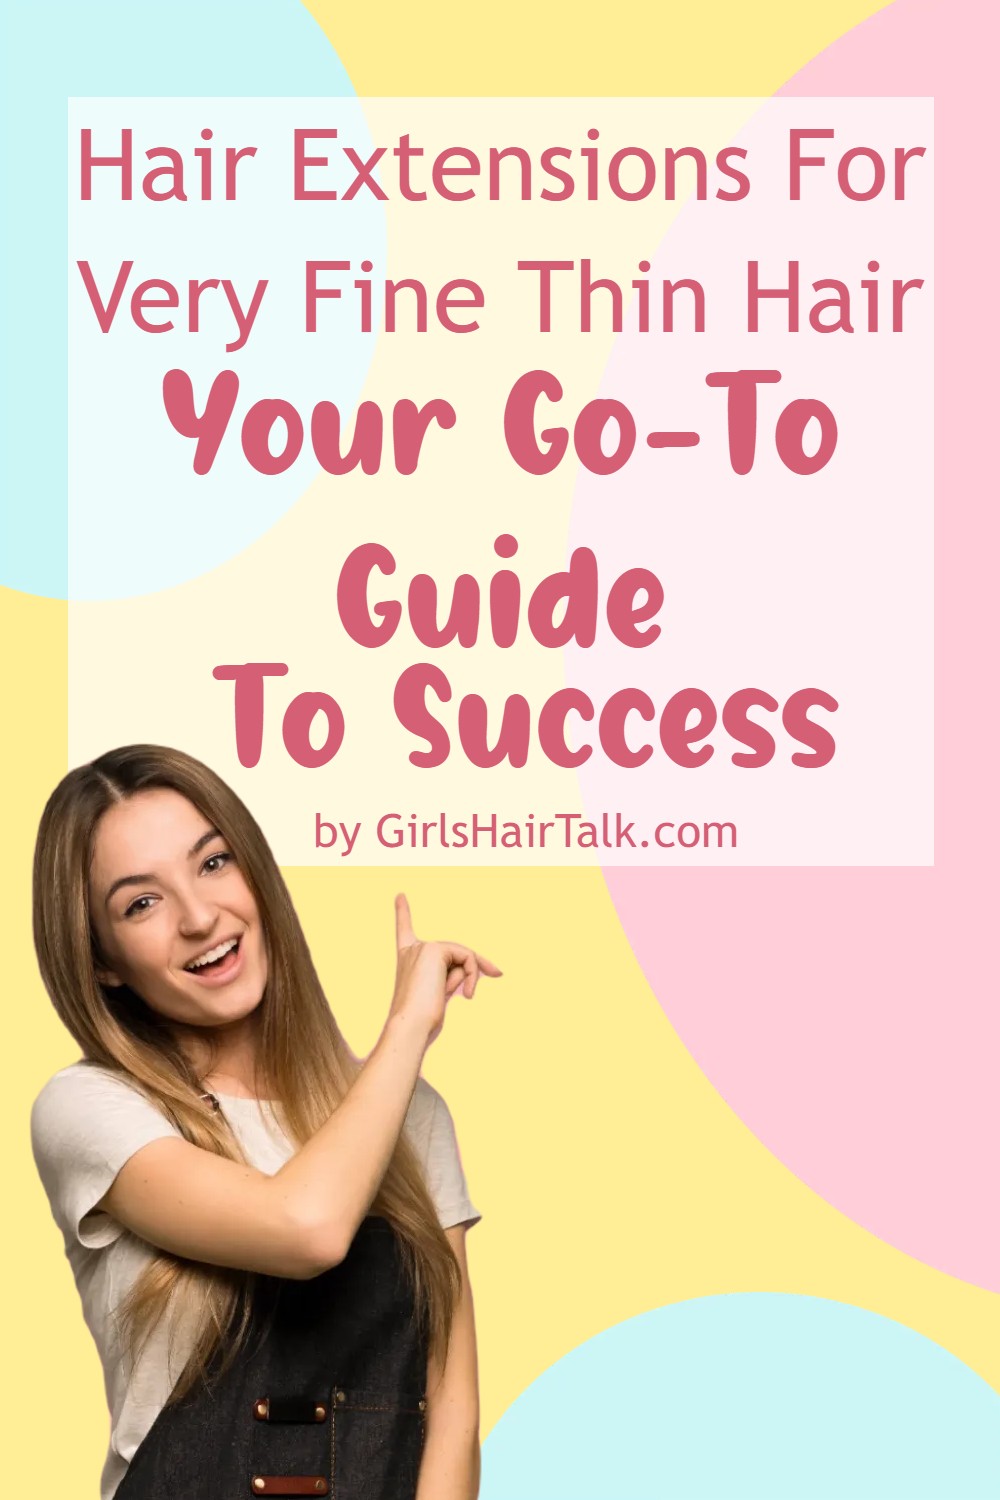 Hair Extensions For Very Fine Thin Hair